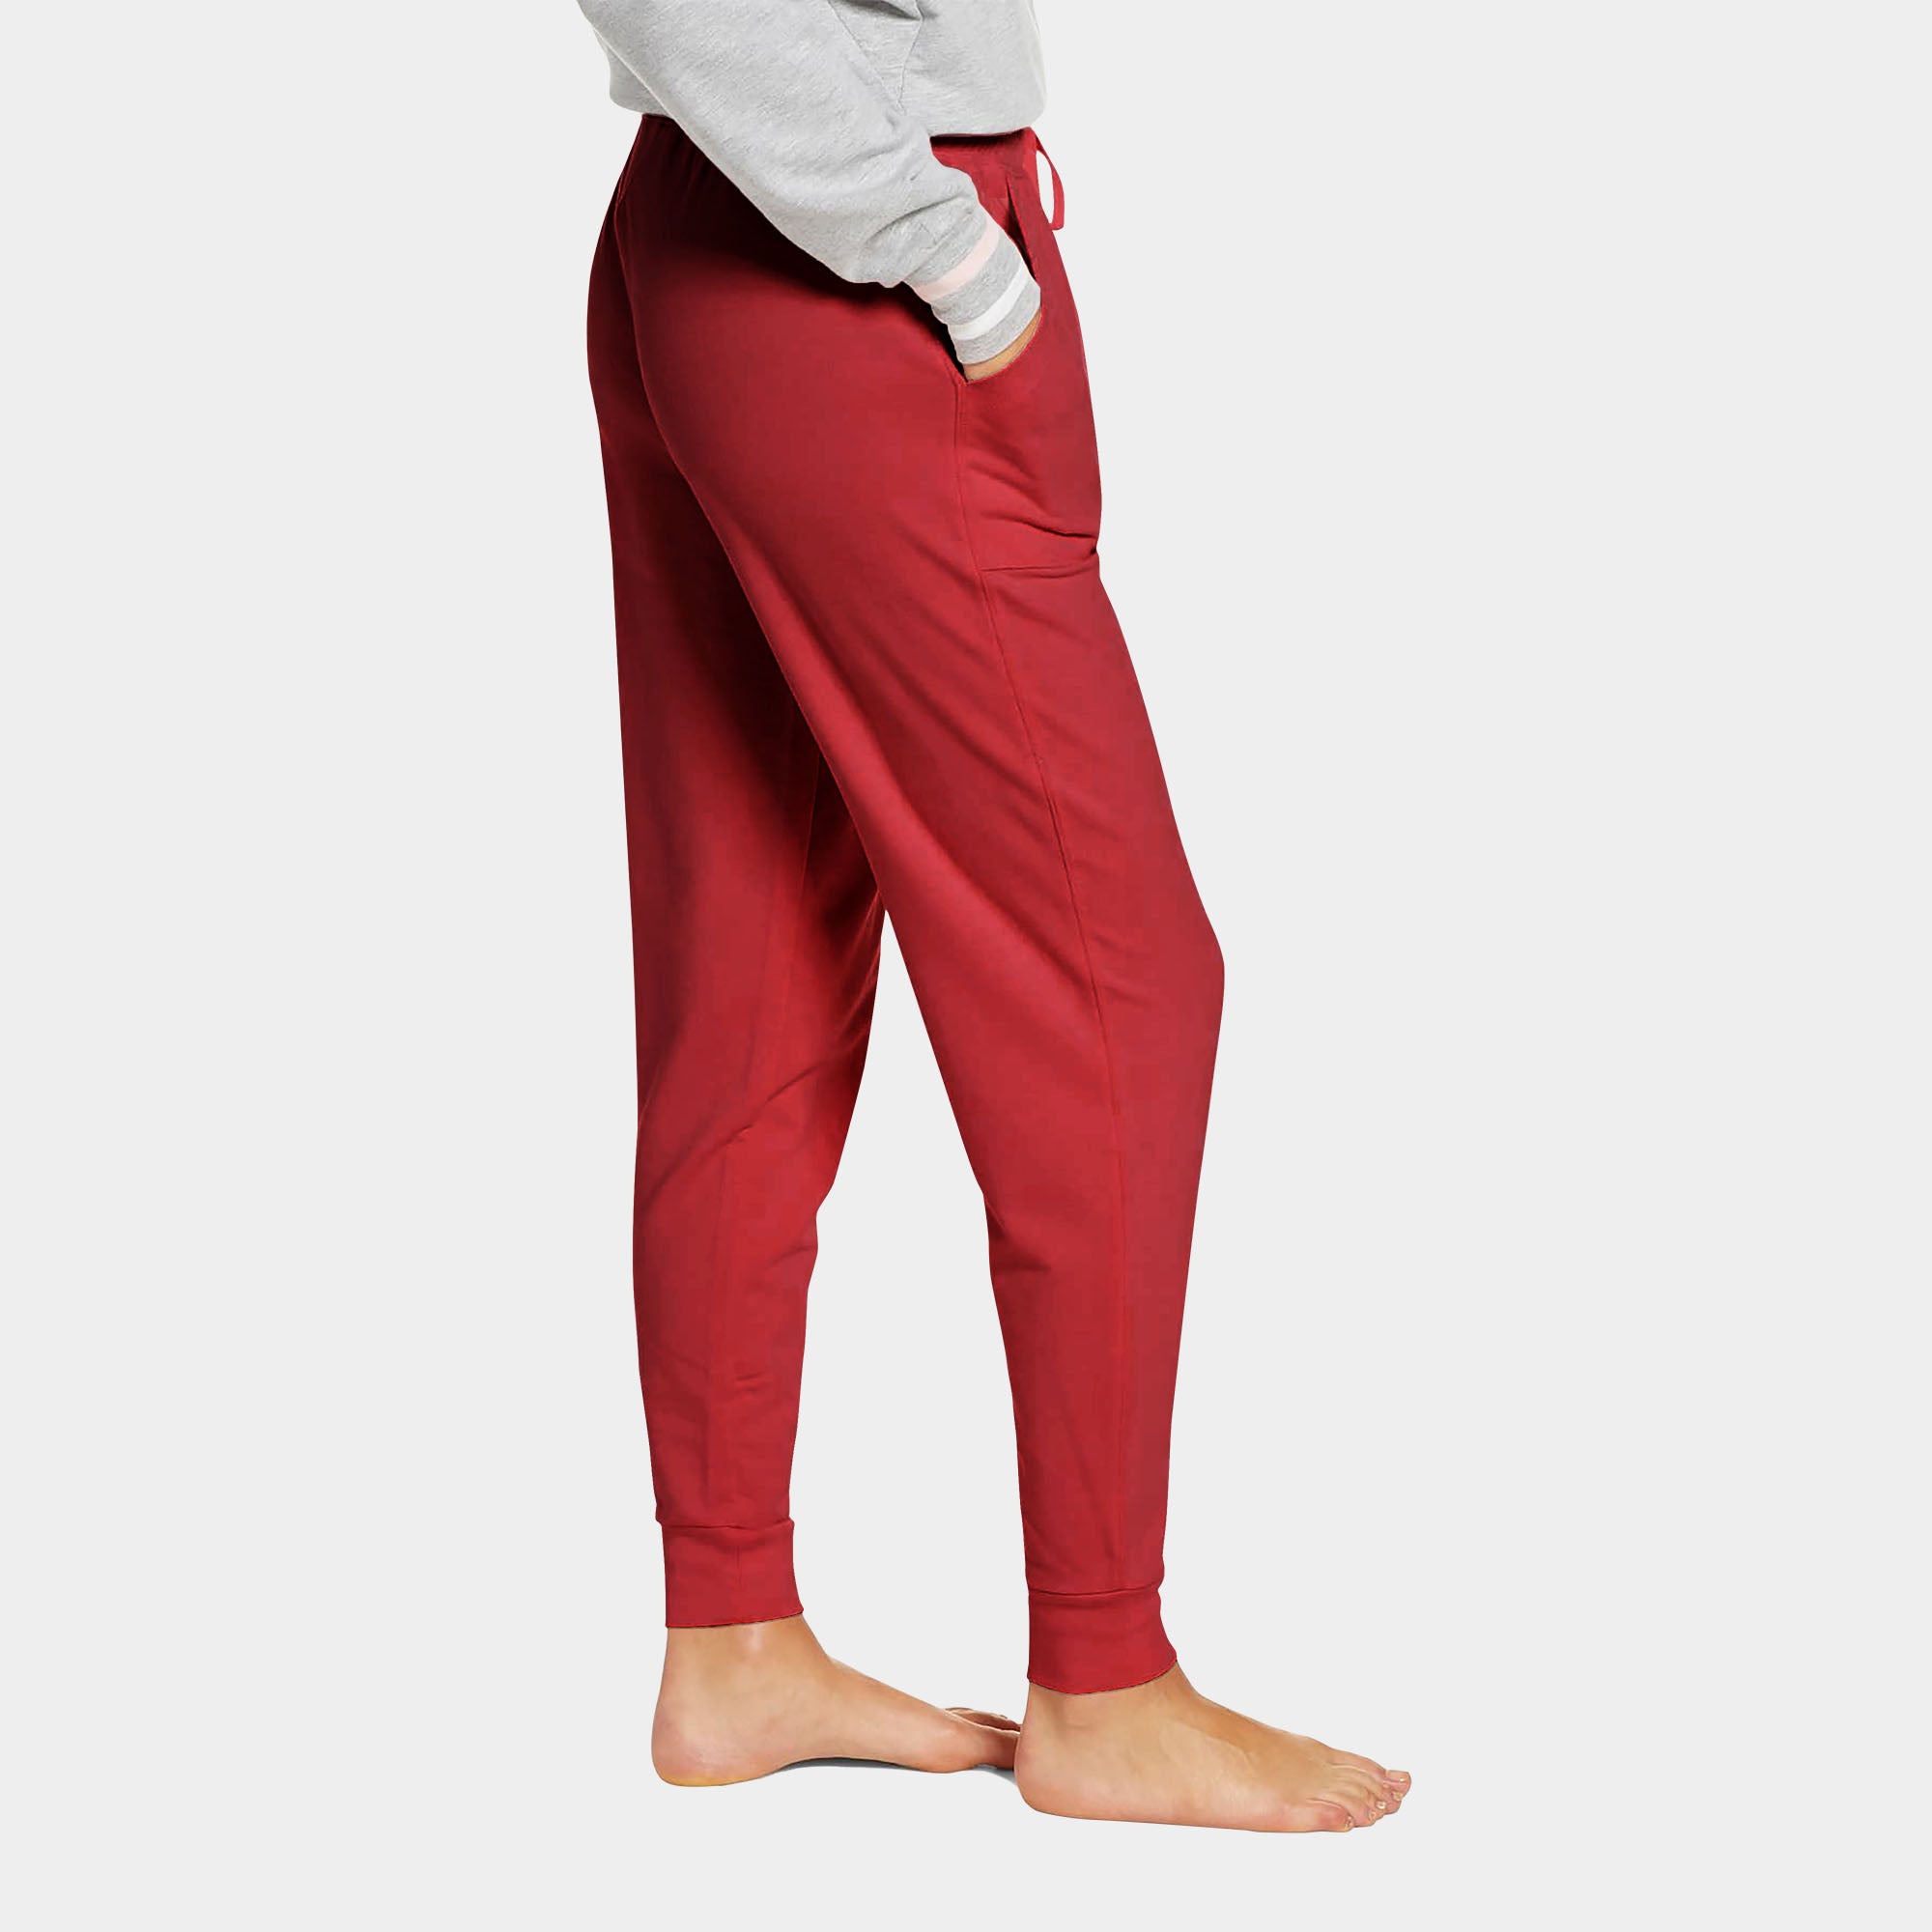 womens fleece sweatpants_yoga joggers_plush inner lining comfort_ribbed cuffs_lady_ladies_sweat for women_activewear_fleece_workout_exercise_weight_pilates_outdoor_indoor_at home_training_running_jogging_hiking_colorfulkoala joggers_yesler_amormio sweatpants_champion_beyond_yoga joggers_nike_rally white_nude sweatpants_lipservice pants_lounge around tan_hanes_teal_fancy_capri_love_french terry_light christmas cotton_Red